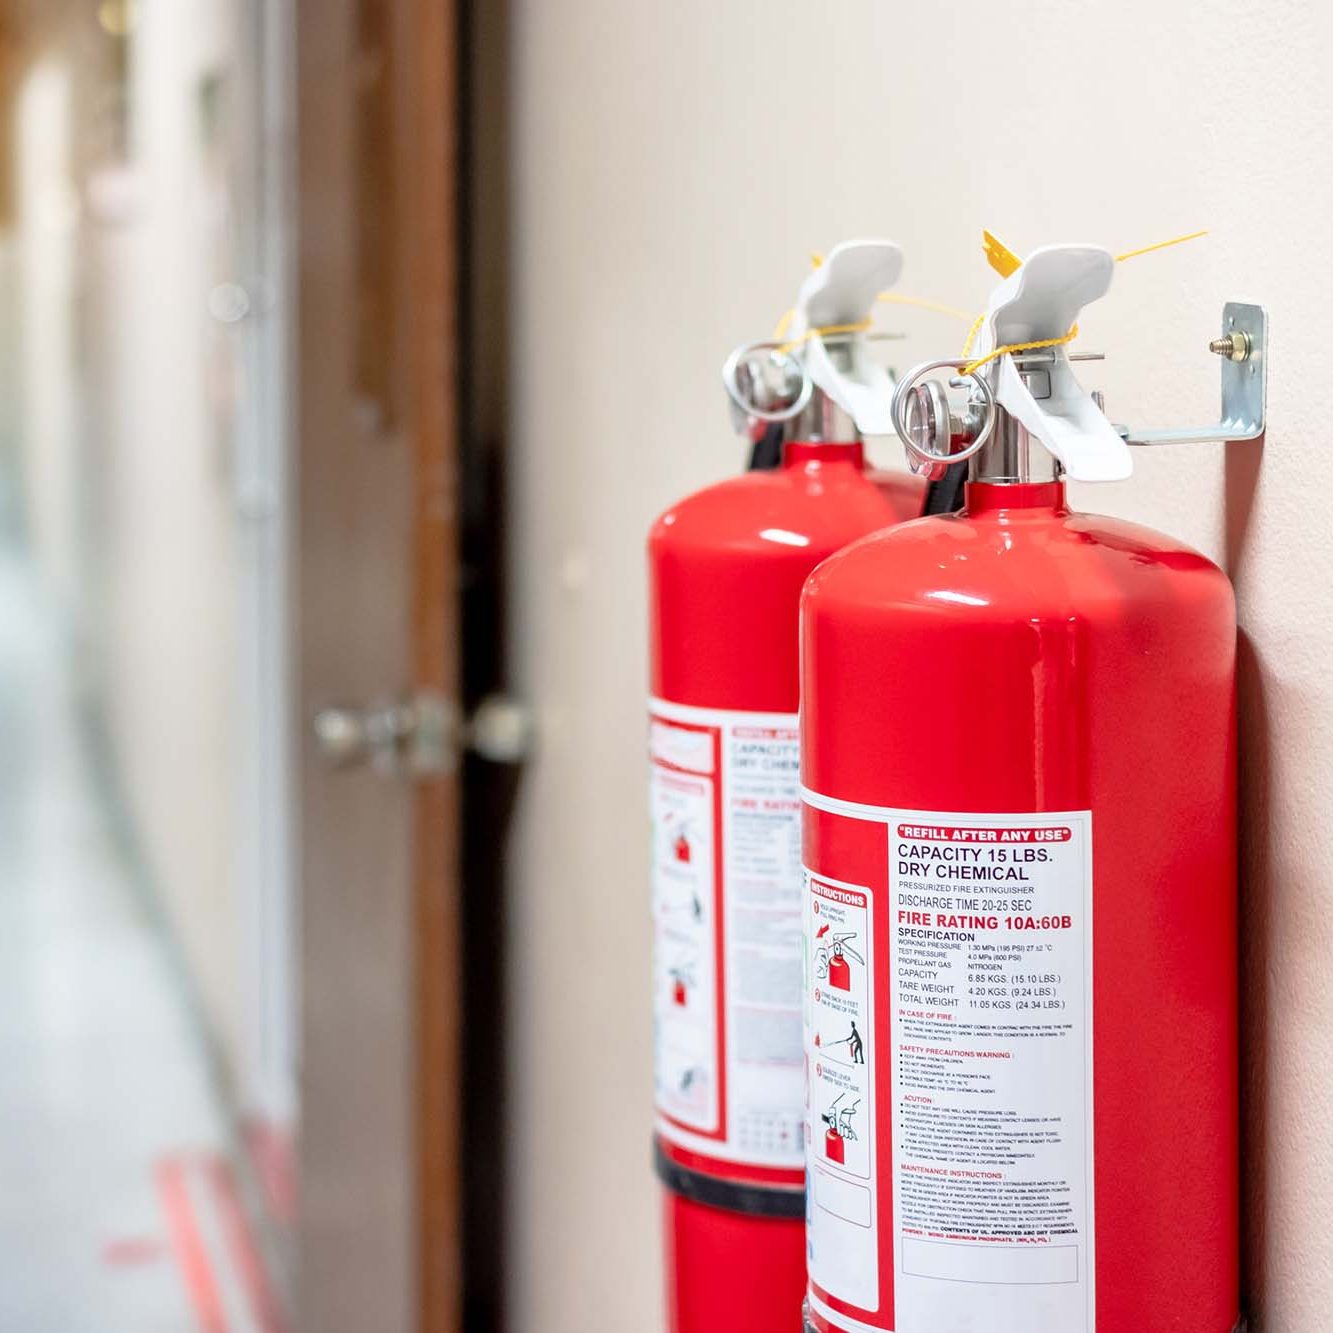 Fire extinguisher system on the wall background, powerful emergency equipment for industrial